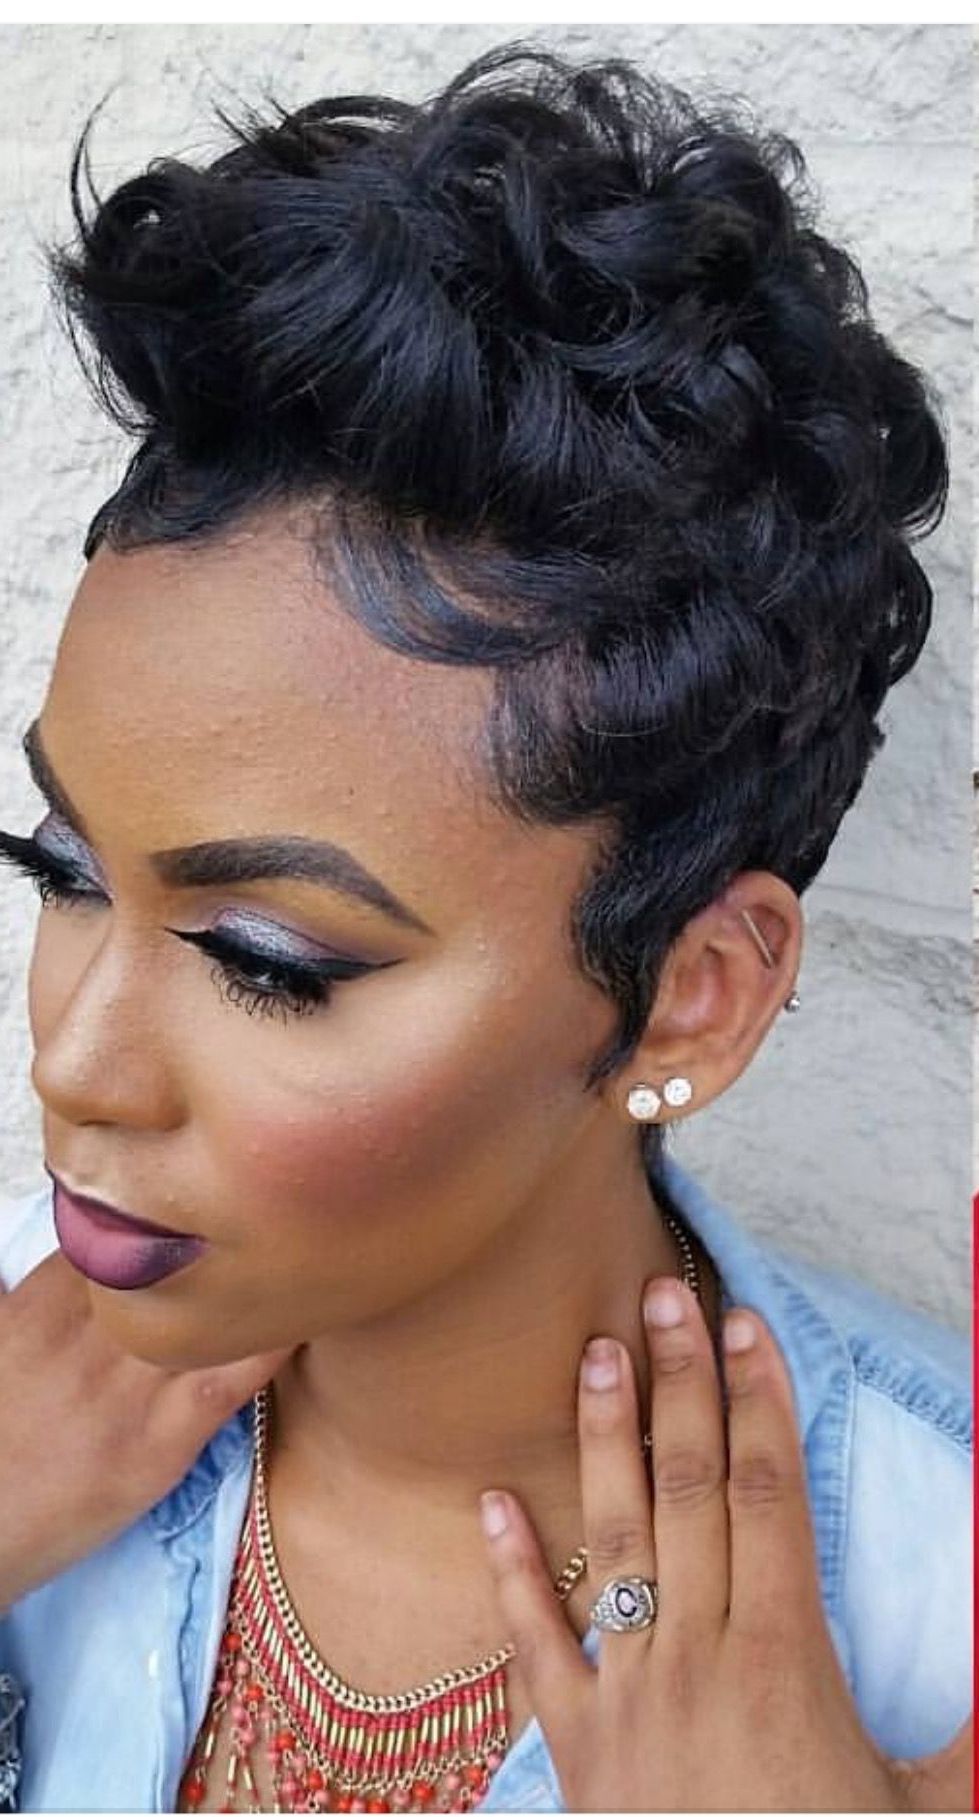 Find Out Full Gallery Of Perfect Sexy Short Black Hairstyles Pertaining To Sexy Black Short Hairstyles (View 19 of 25)